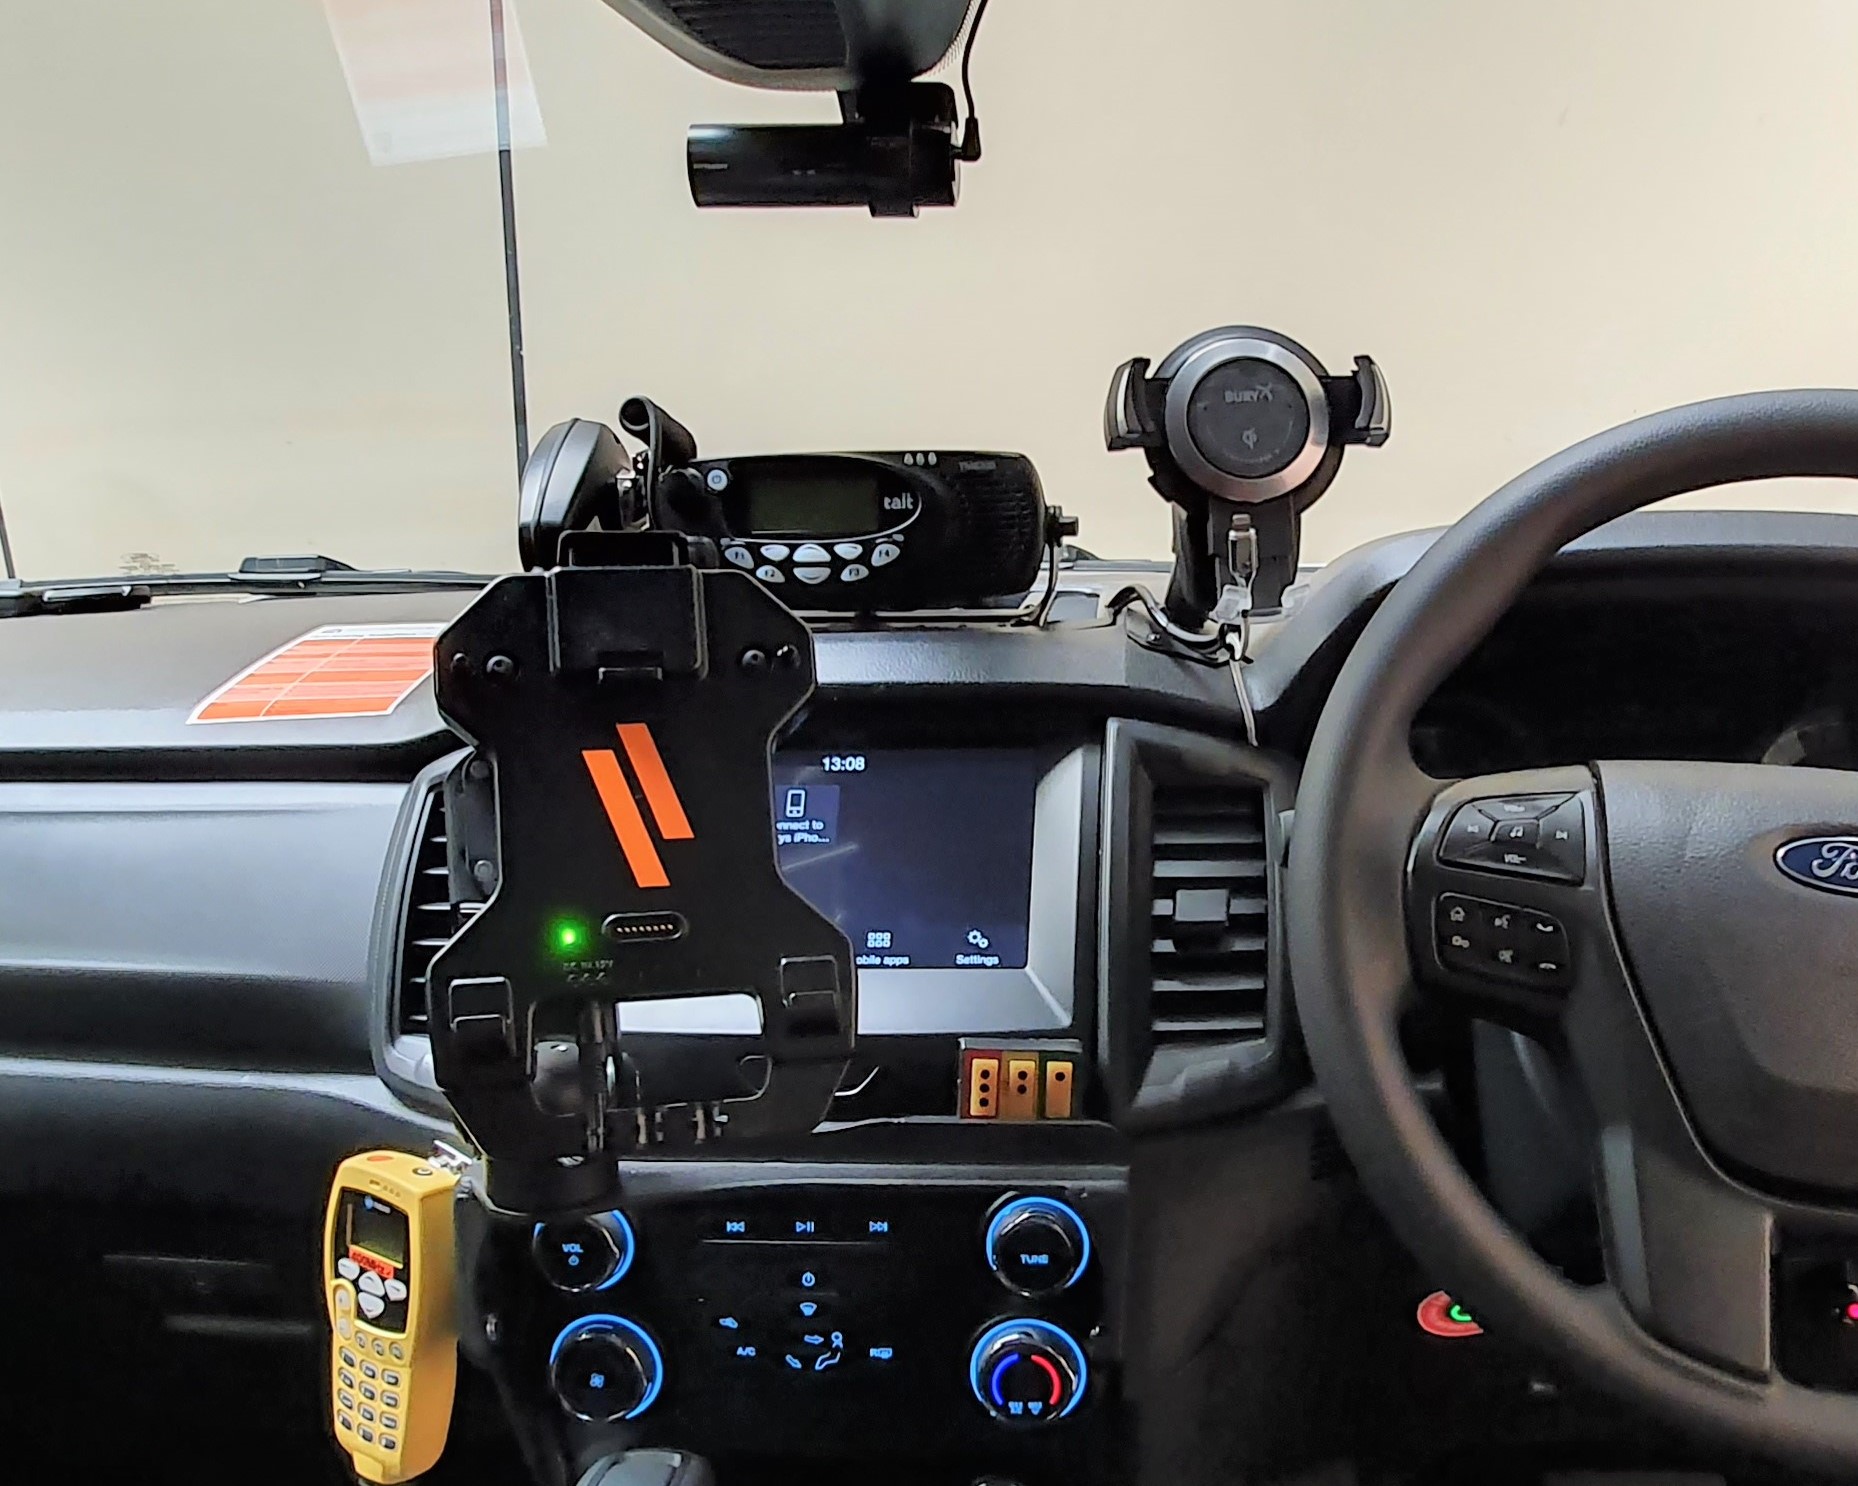 The Havis iPad vehicle dock mounted in a Ford Ranger